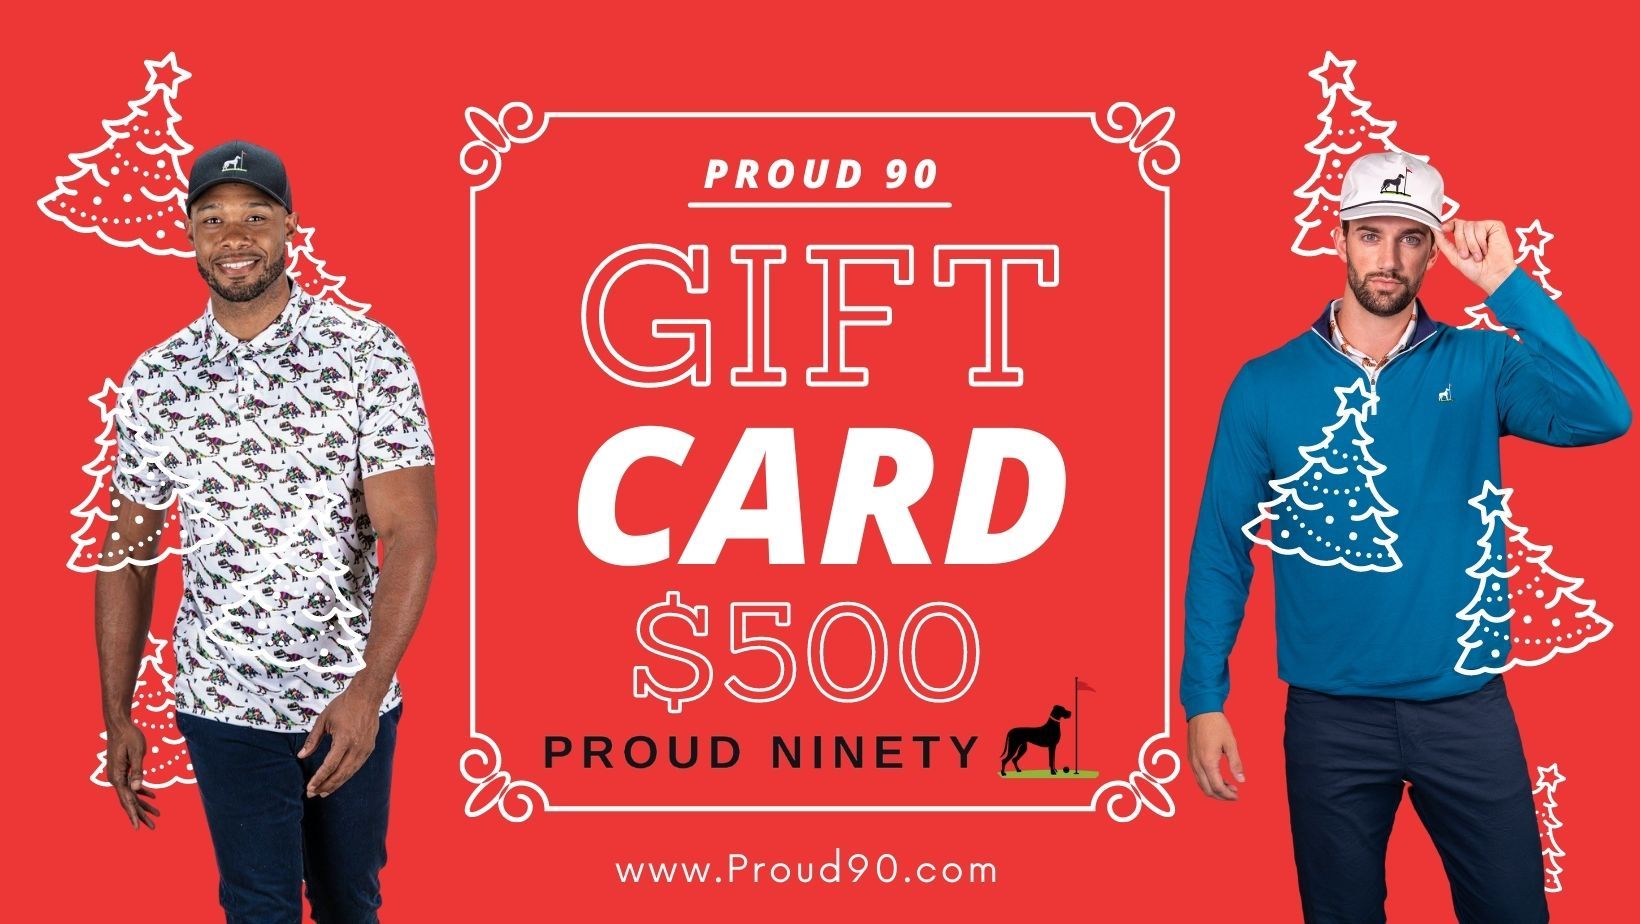 Proud 90 Gift Card Gift Cards Proud 90 $500 